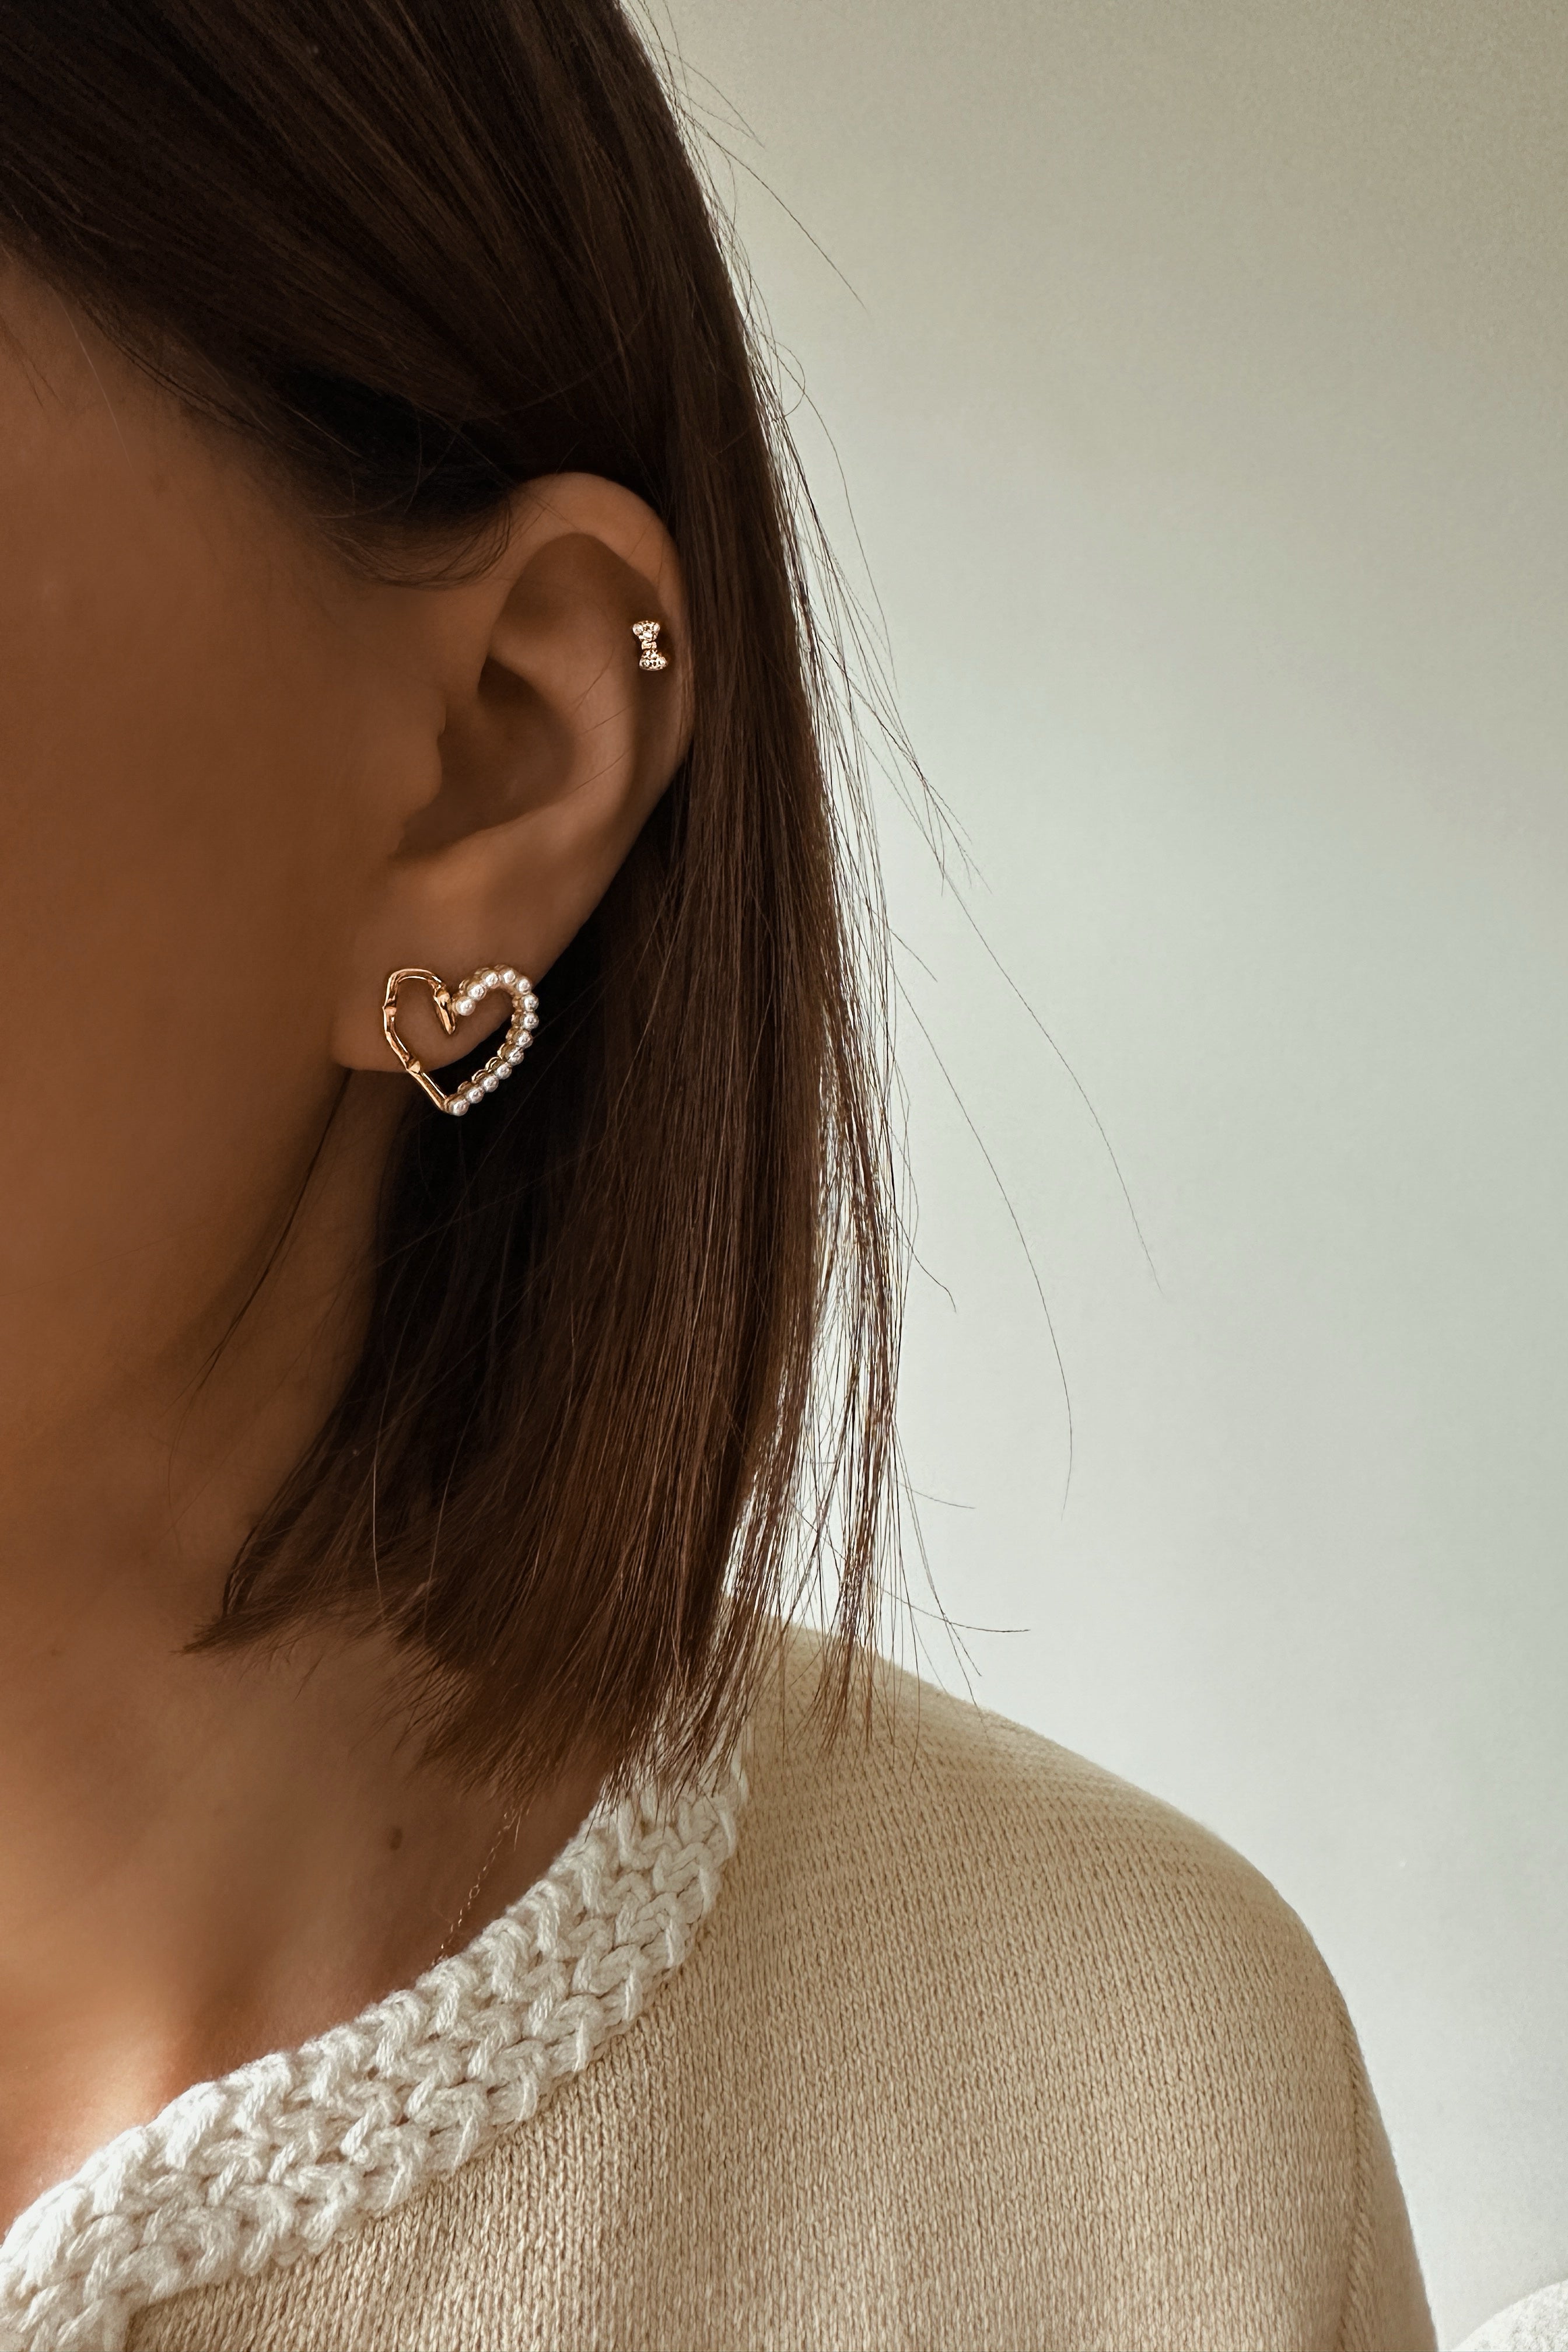 The Heart - Bow Piercing - Boutique Minimaliste has waterproof, durable, elegant and vintage inspired jewelry